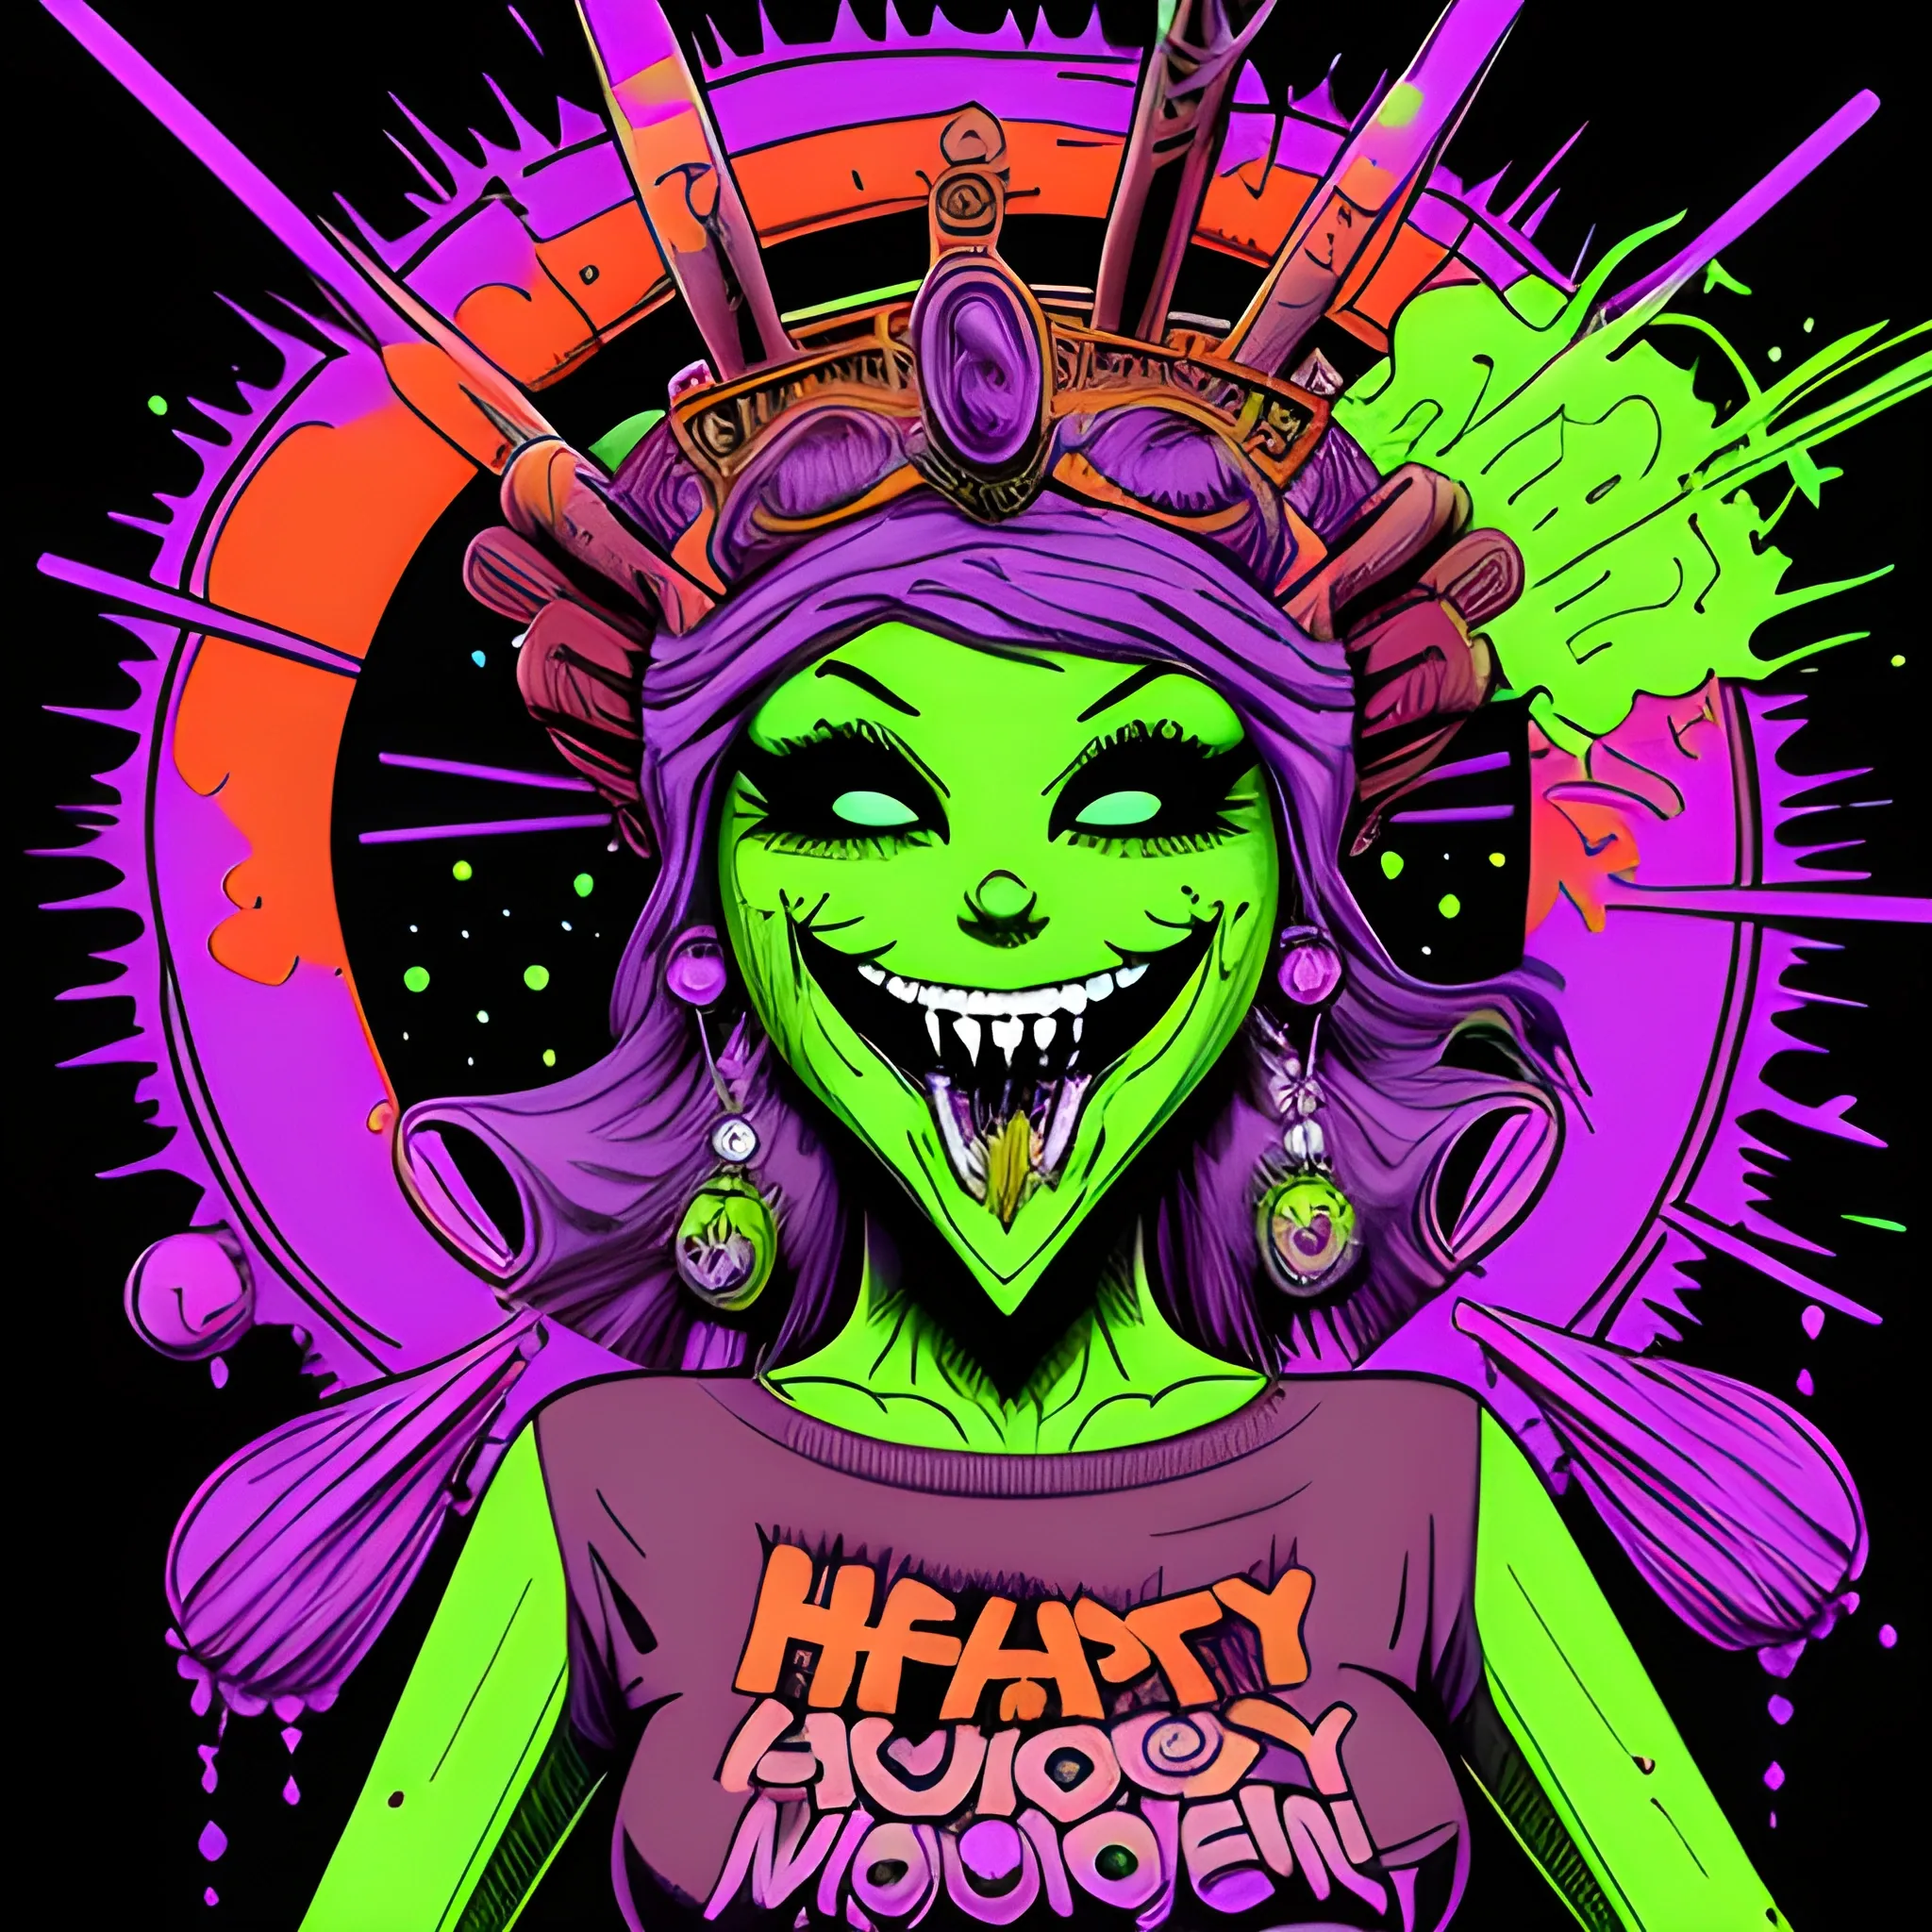 dayglo orange, neon grape purple, chartreuse green, Halloween, amethyst smoking goddess, combine the styles of Munk One and Alex Pardee, trending on deviantart, lowbrow, heavy metal tshirt design, big smile picture, on a black background, luminous color sparkles, nebula sky